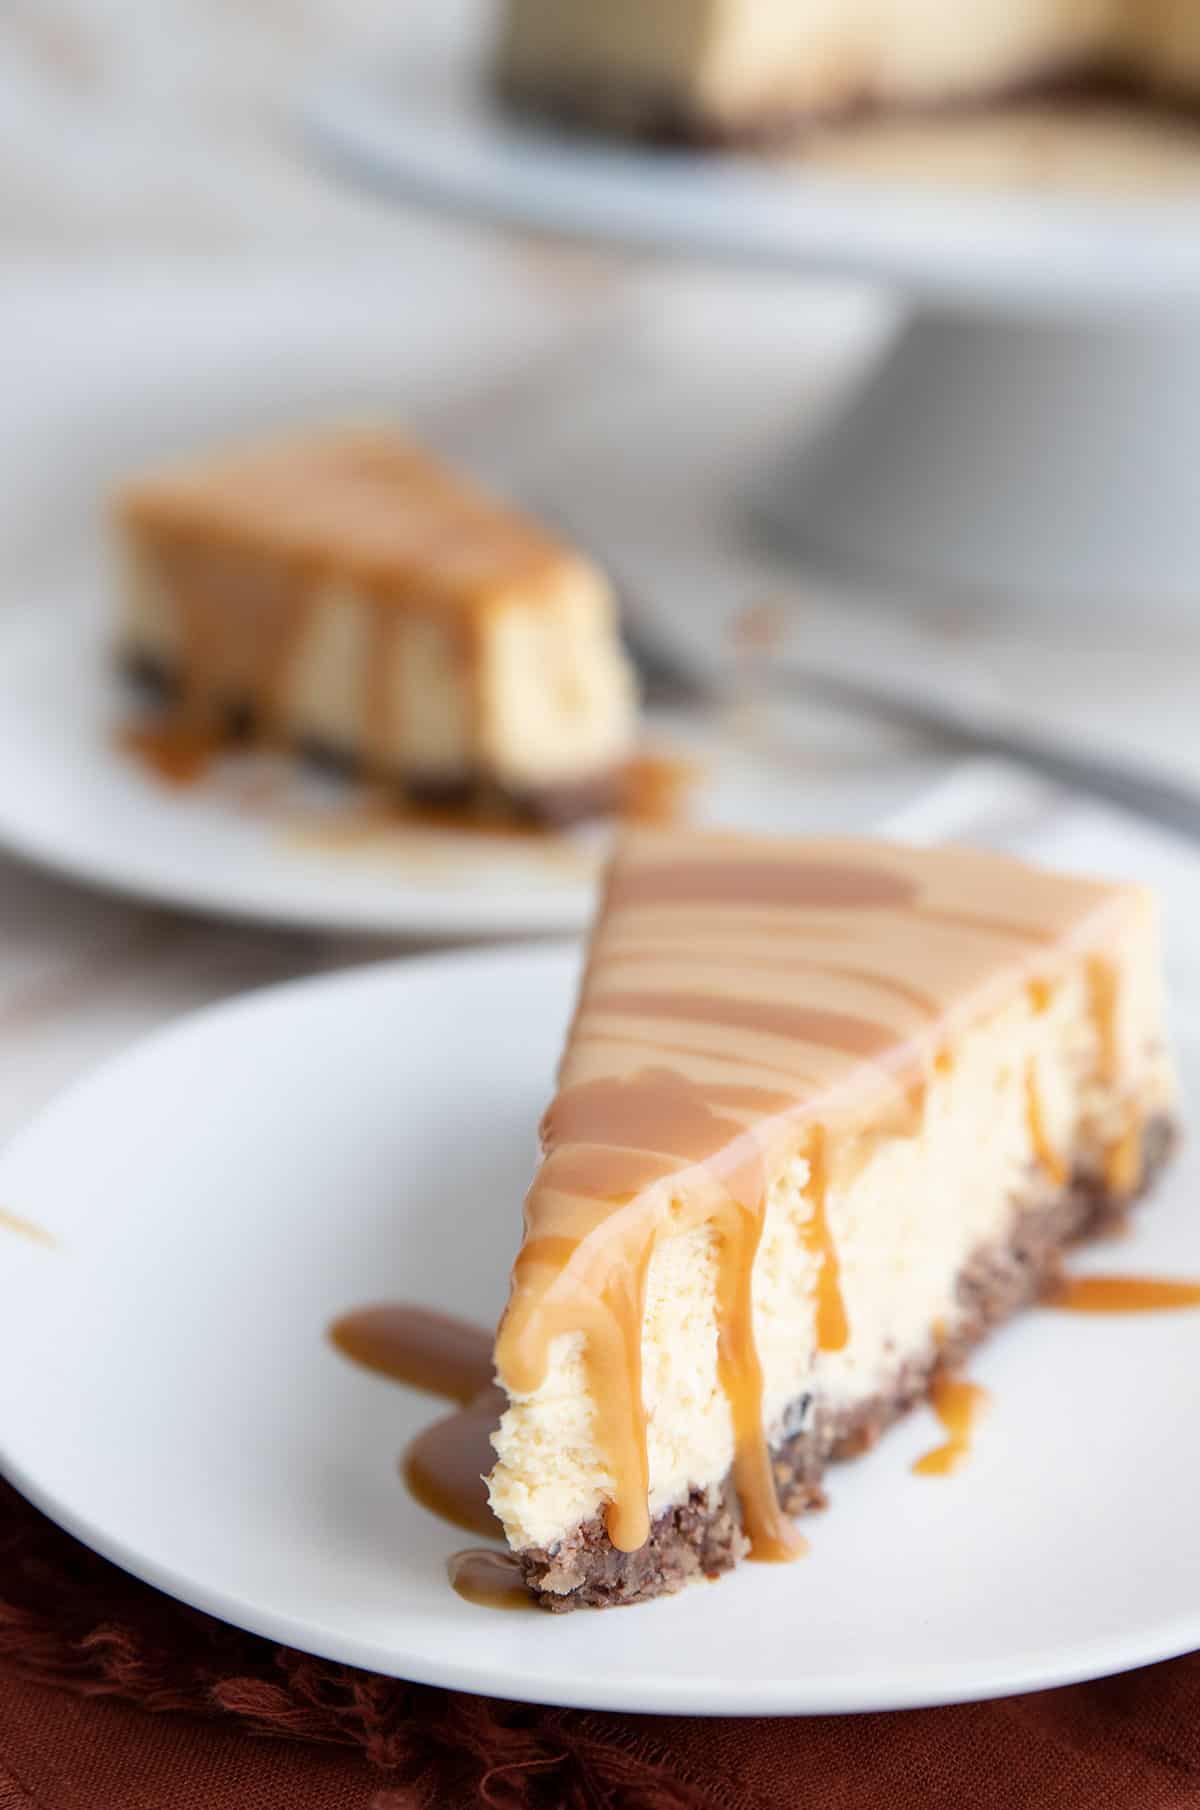 A slice of Dulce de Leche Cheesecake on a white plate with more cake in the background.